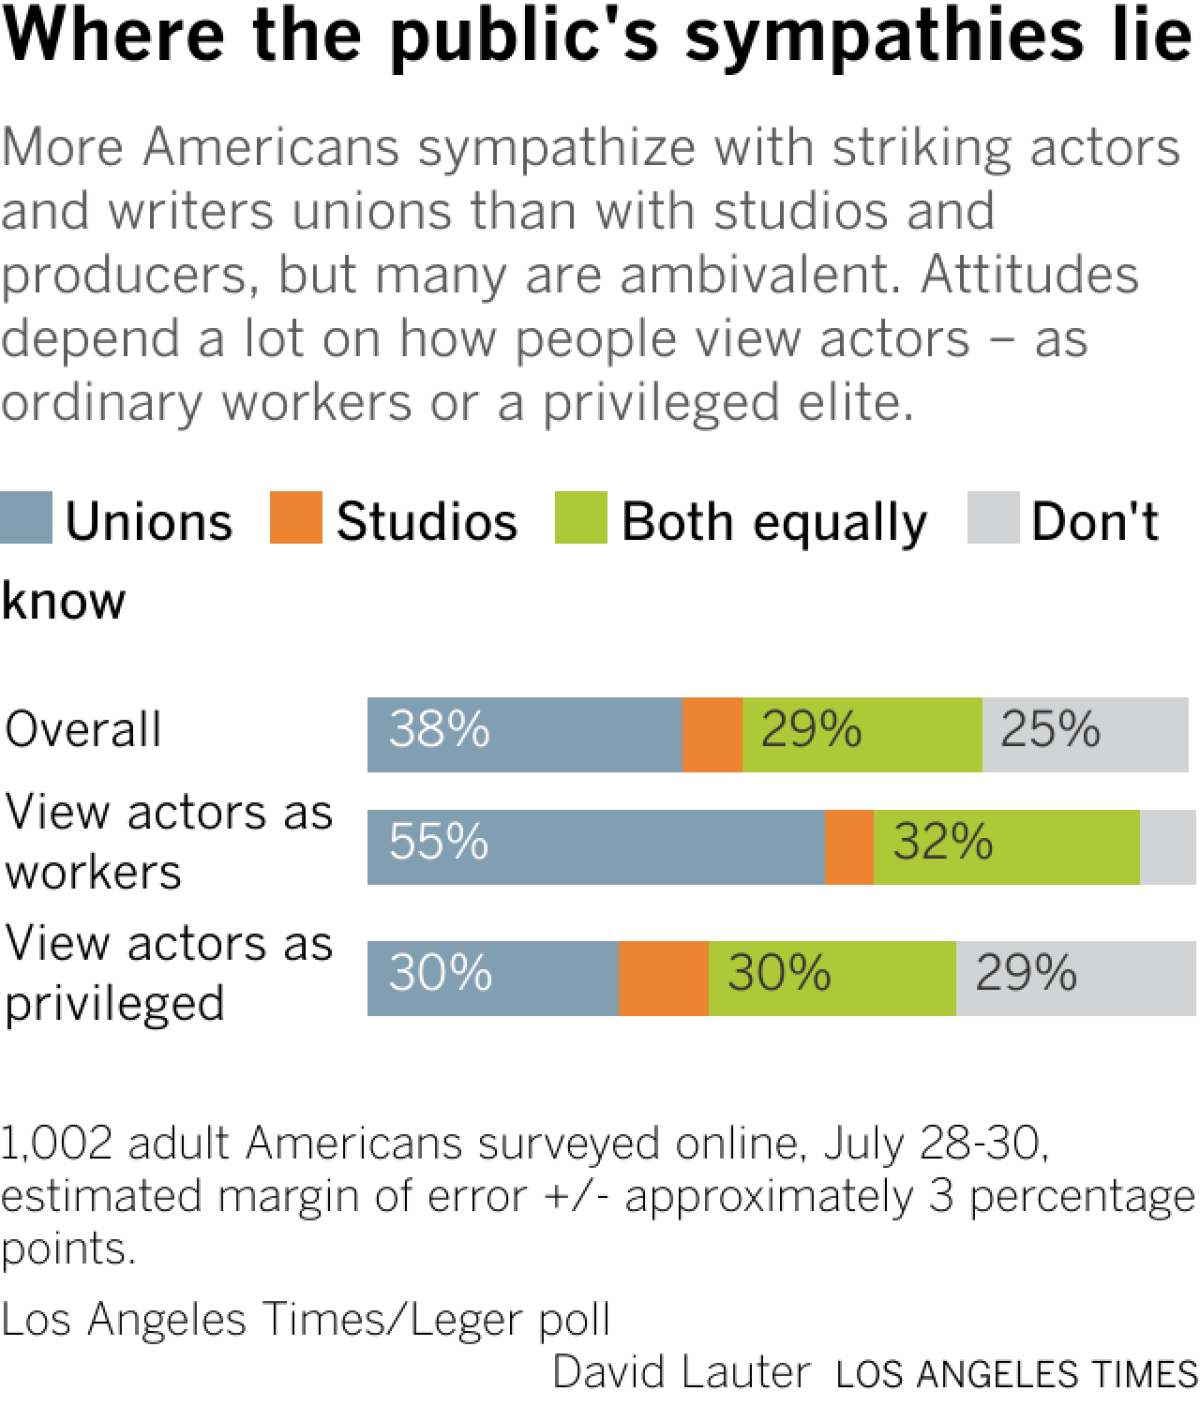 More Americans sympathize with striking actors and writers unions than with studios and producers, but many are ambivalent. Attitudes depend a lot on how people view actors – as ordinary workers or a privileged elite.